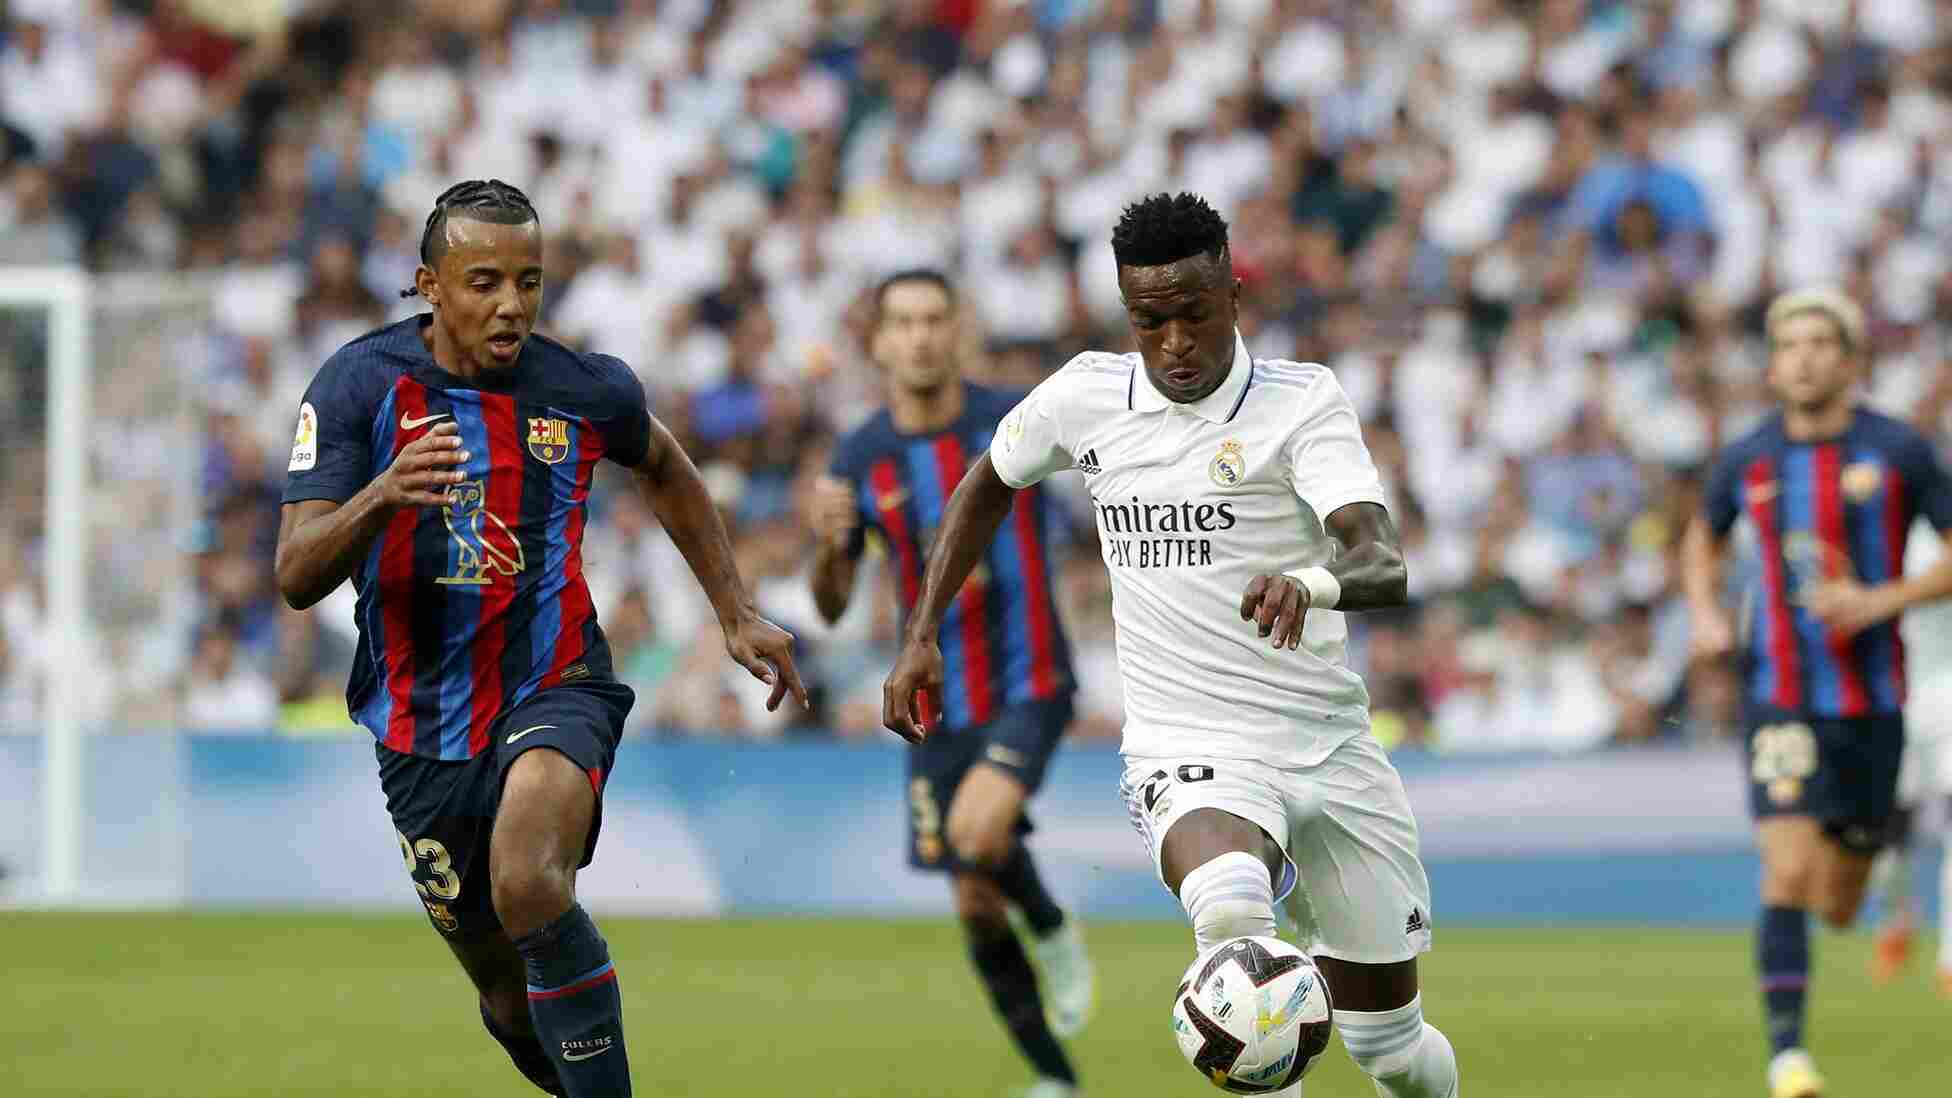 Real Madrid vs Barcelona, Copa del Rey Live Streaming Details: How to Watch Free Live Telecast Stream Online in India